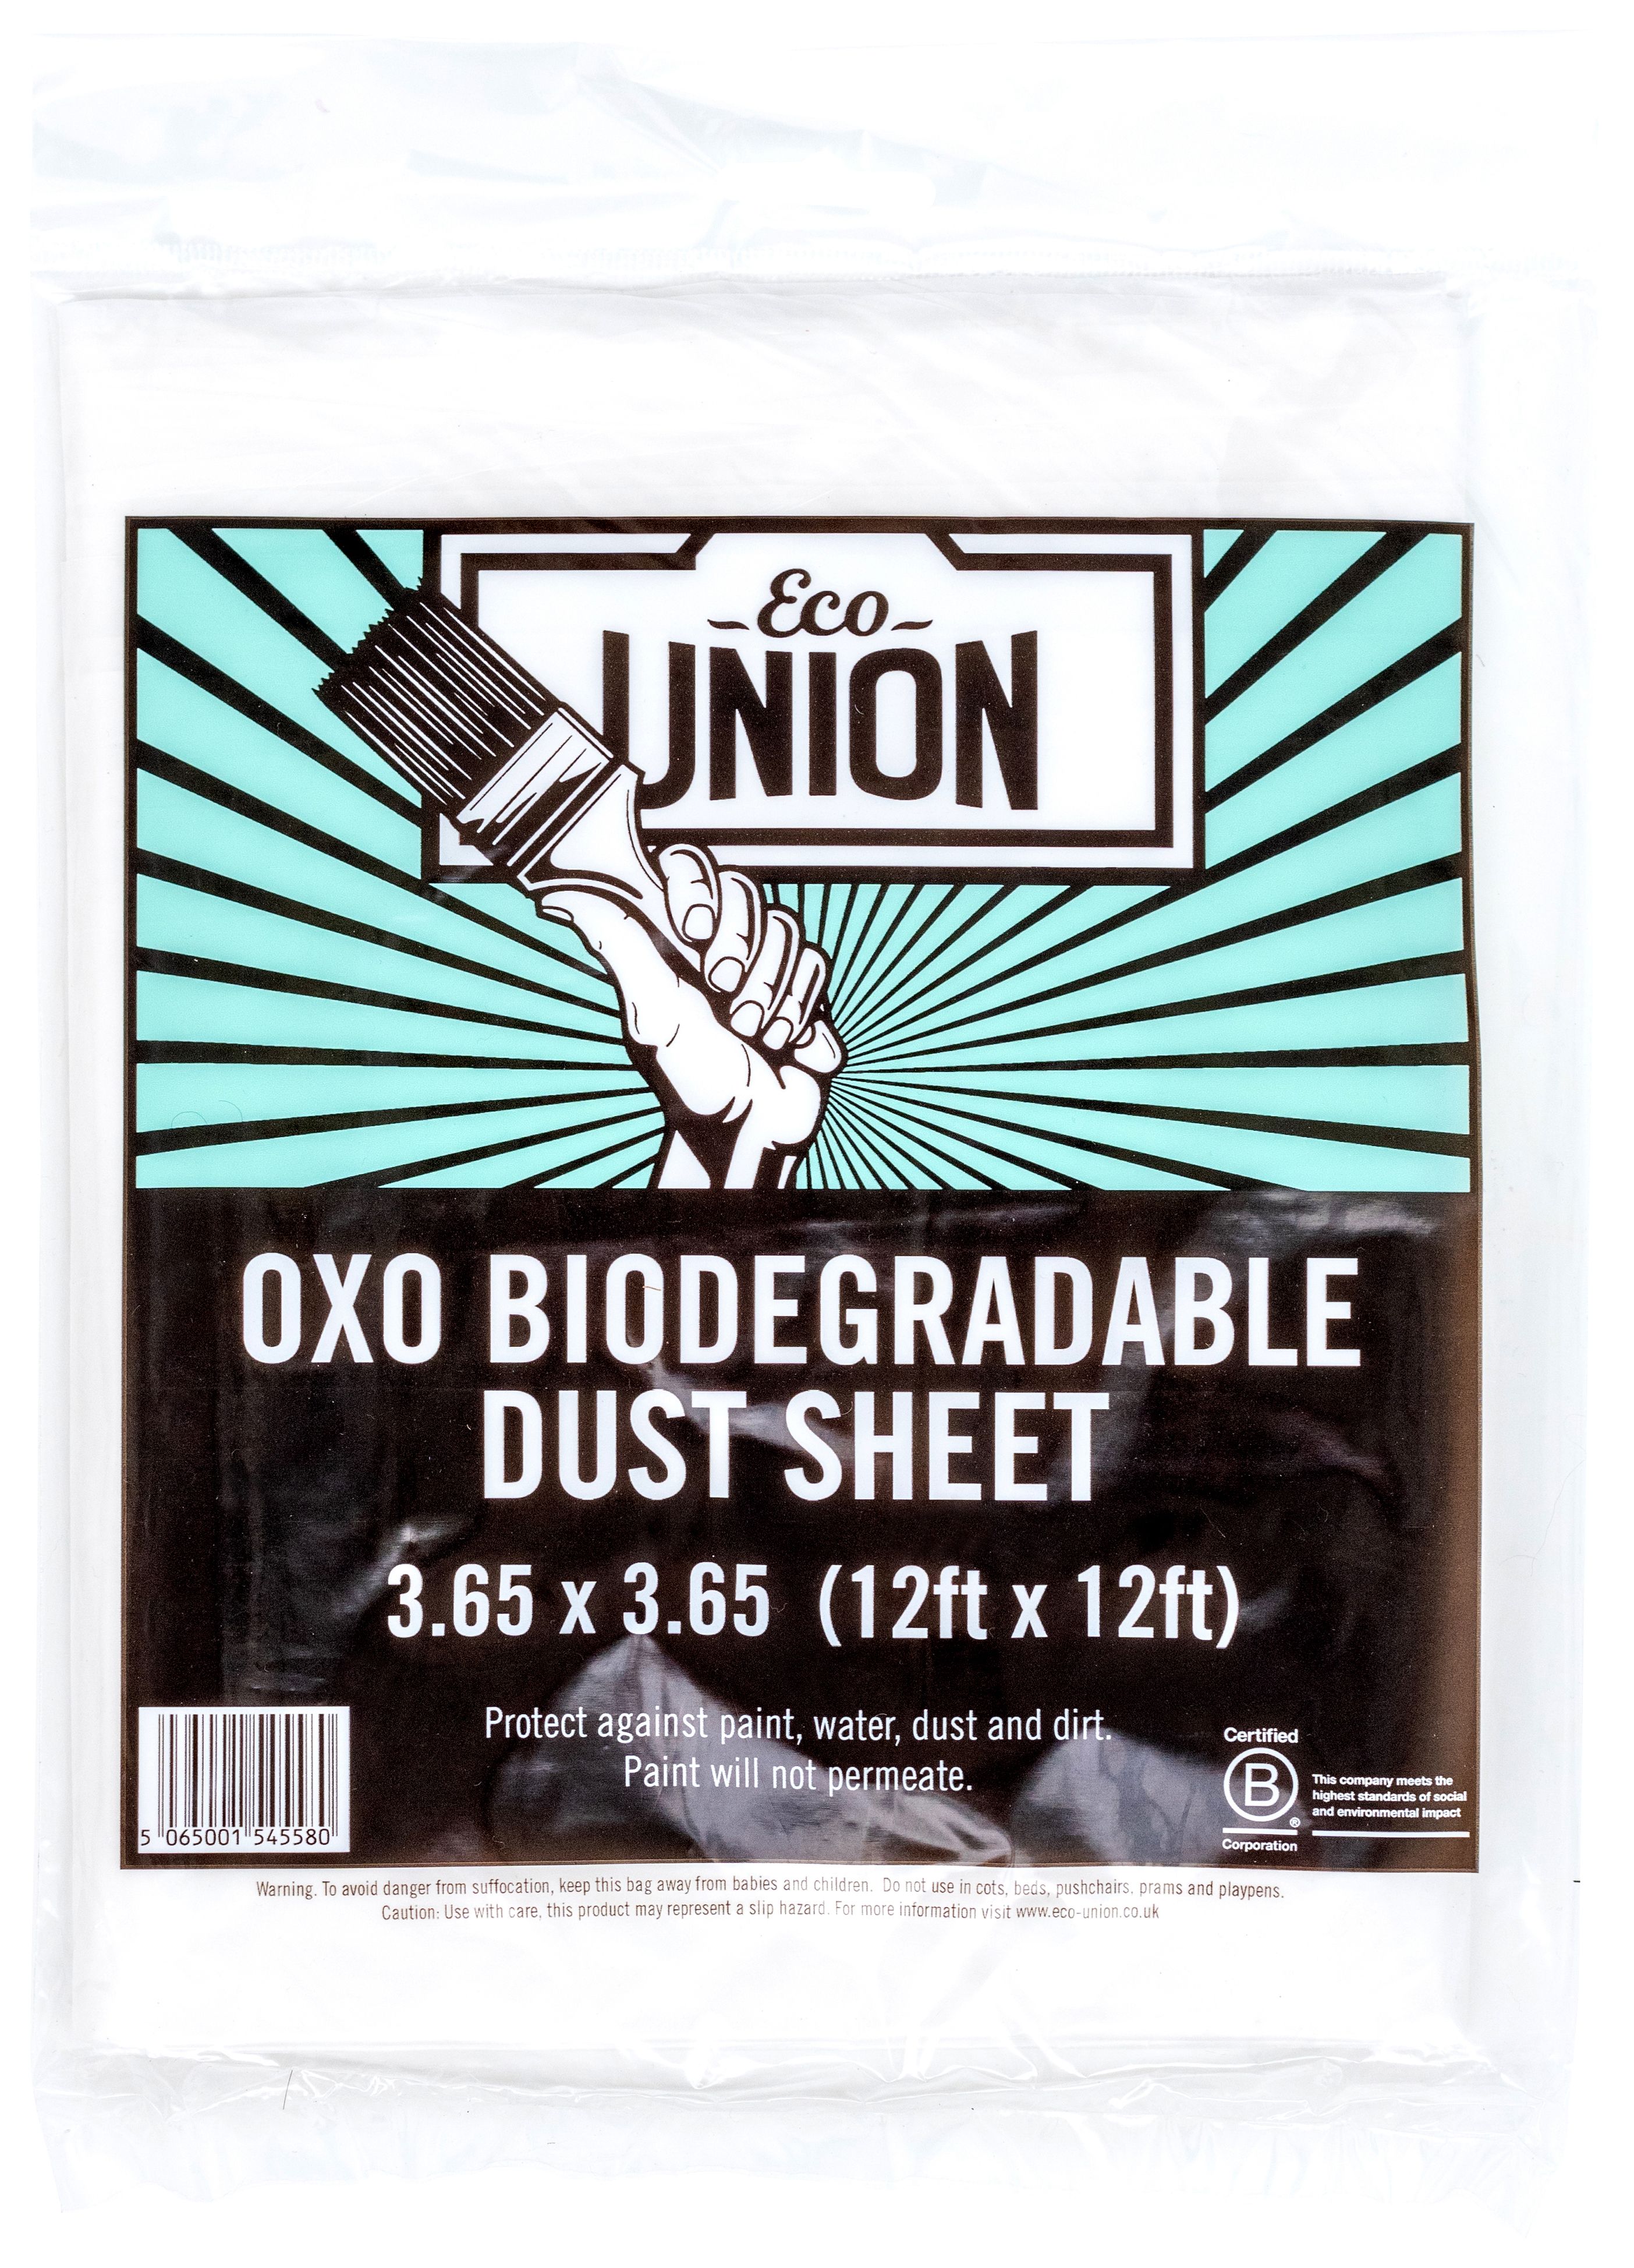 Image of Oxo Biodegradable Dust Sheet - 12ft x 12ft